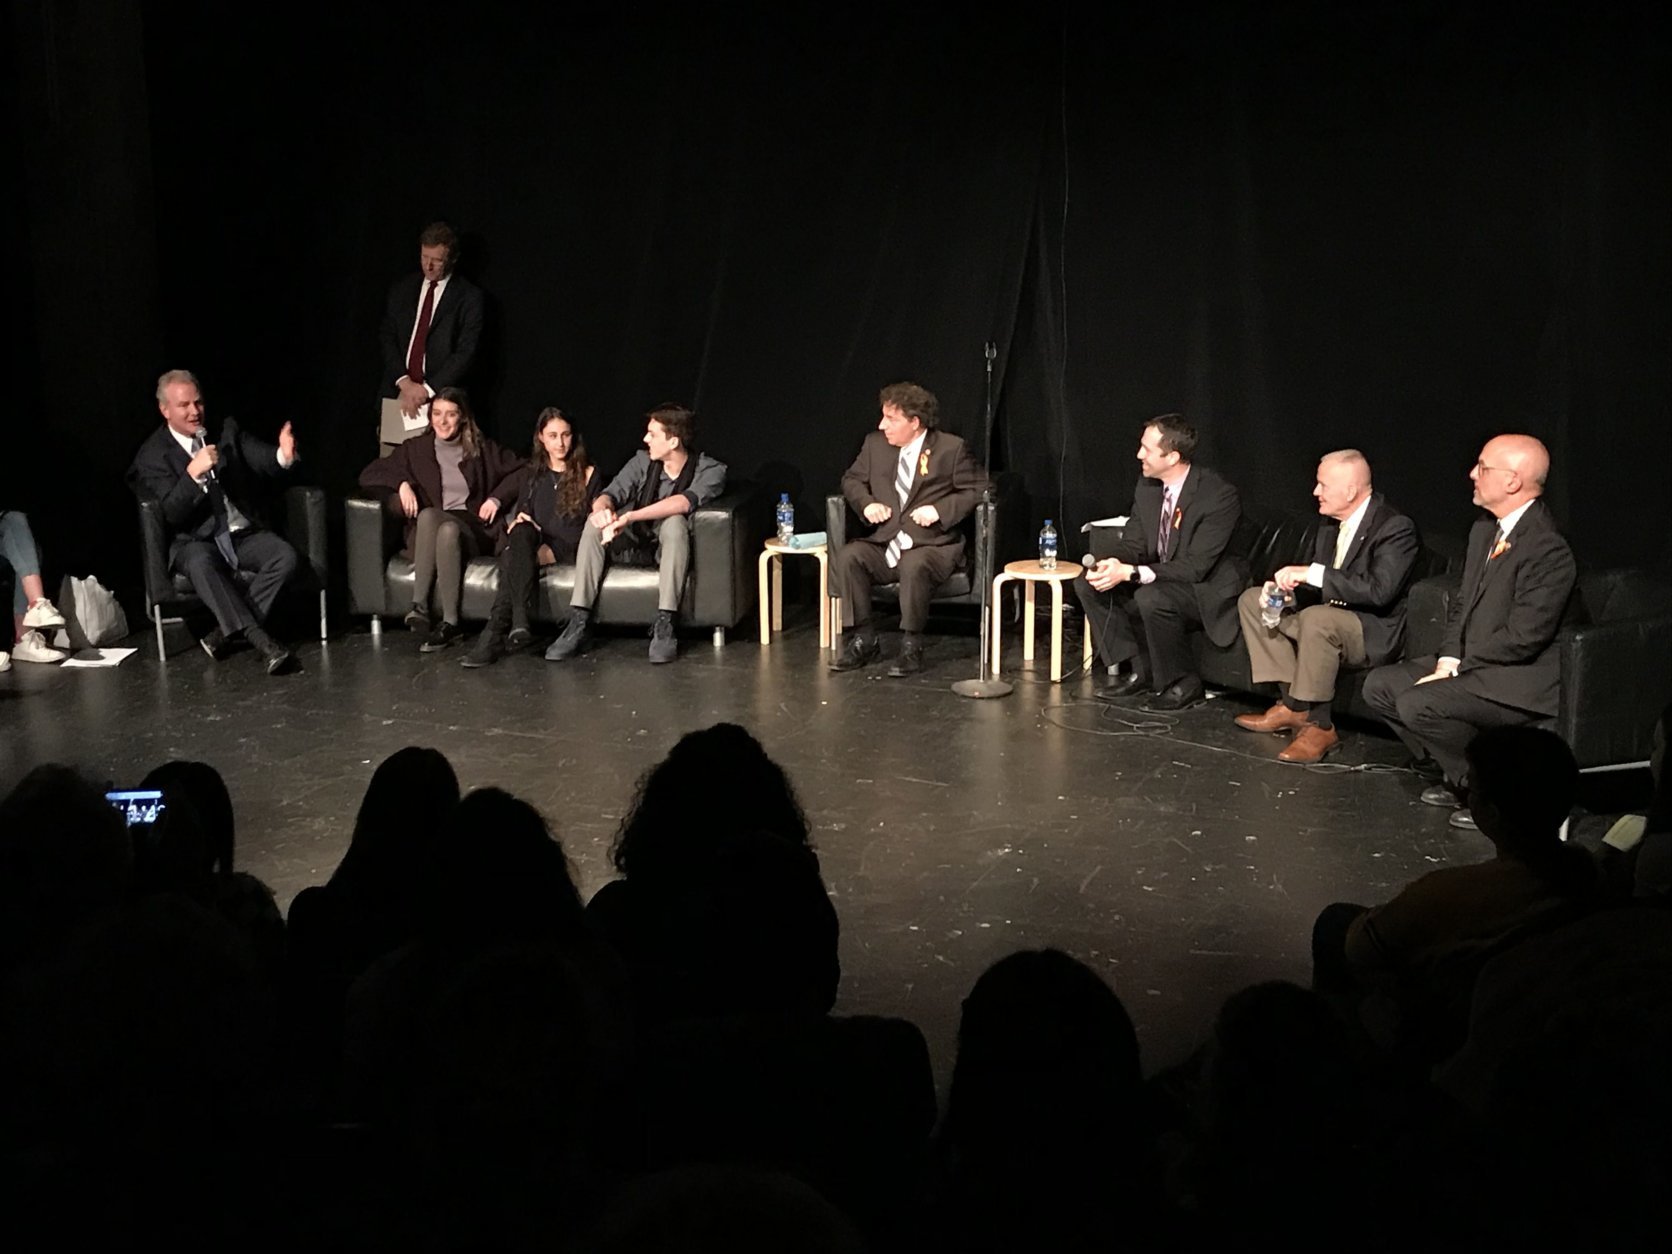 Sen. Chris Van Hollen, D-Md., (left, with microphone) was among the lawmakers who joined Bethesda-Chevy Chase High School students and others for a panel discussion about gun violence Tuesday, March 13, 2018. (WTOP/Michelle Basch)